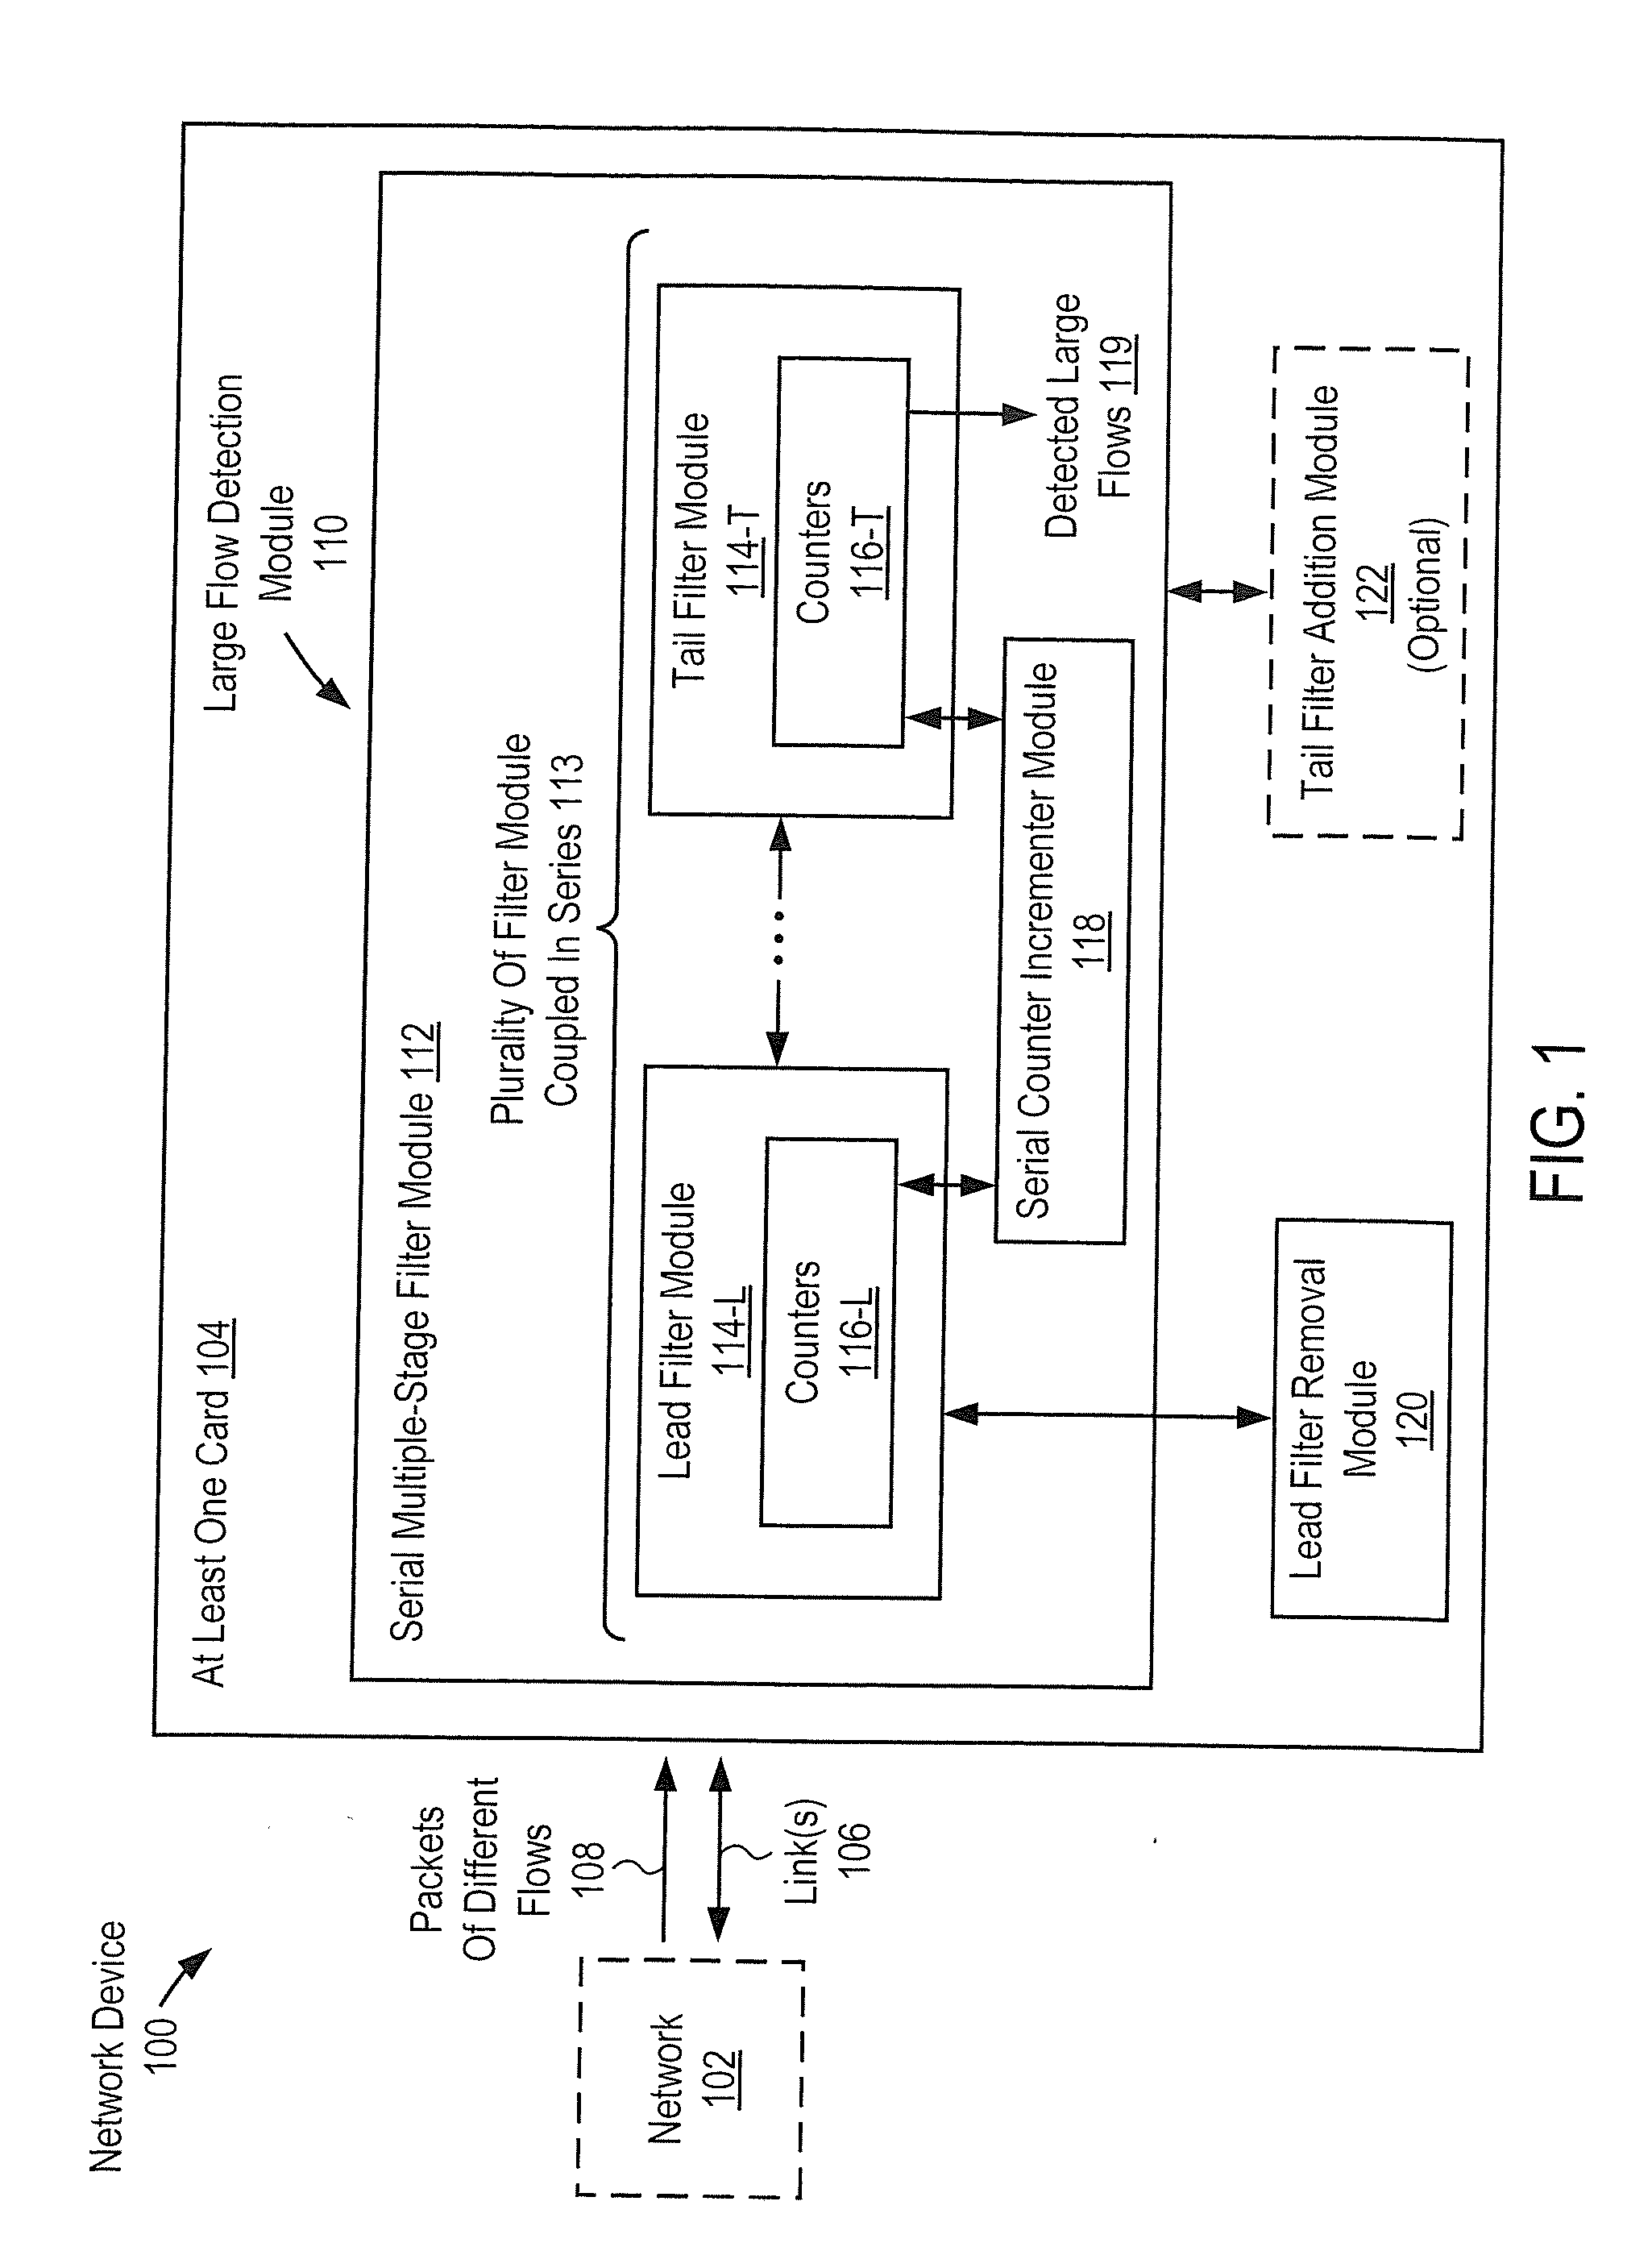 Removing lead filter from serial multiple-stage filter used to detect large flows in order to purge flows for prolonged operation